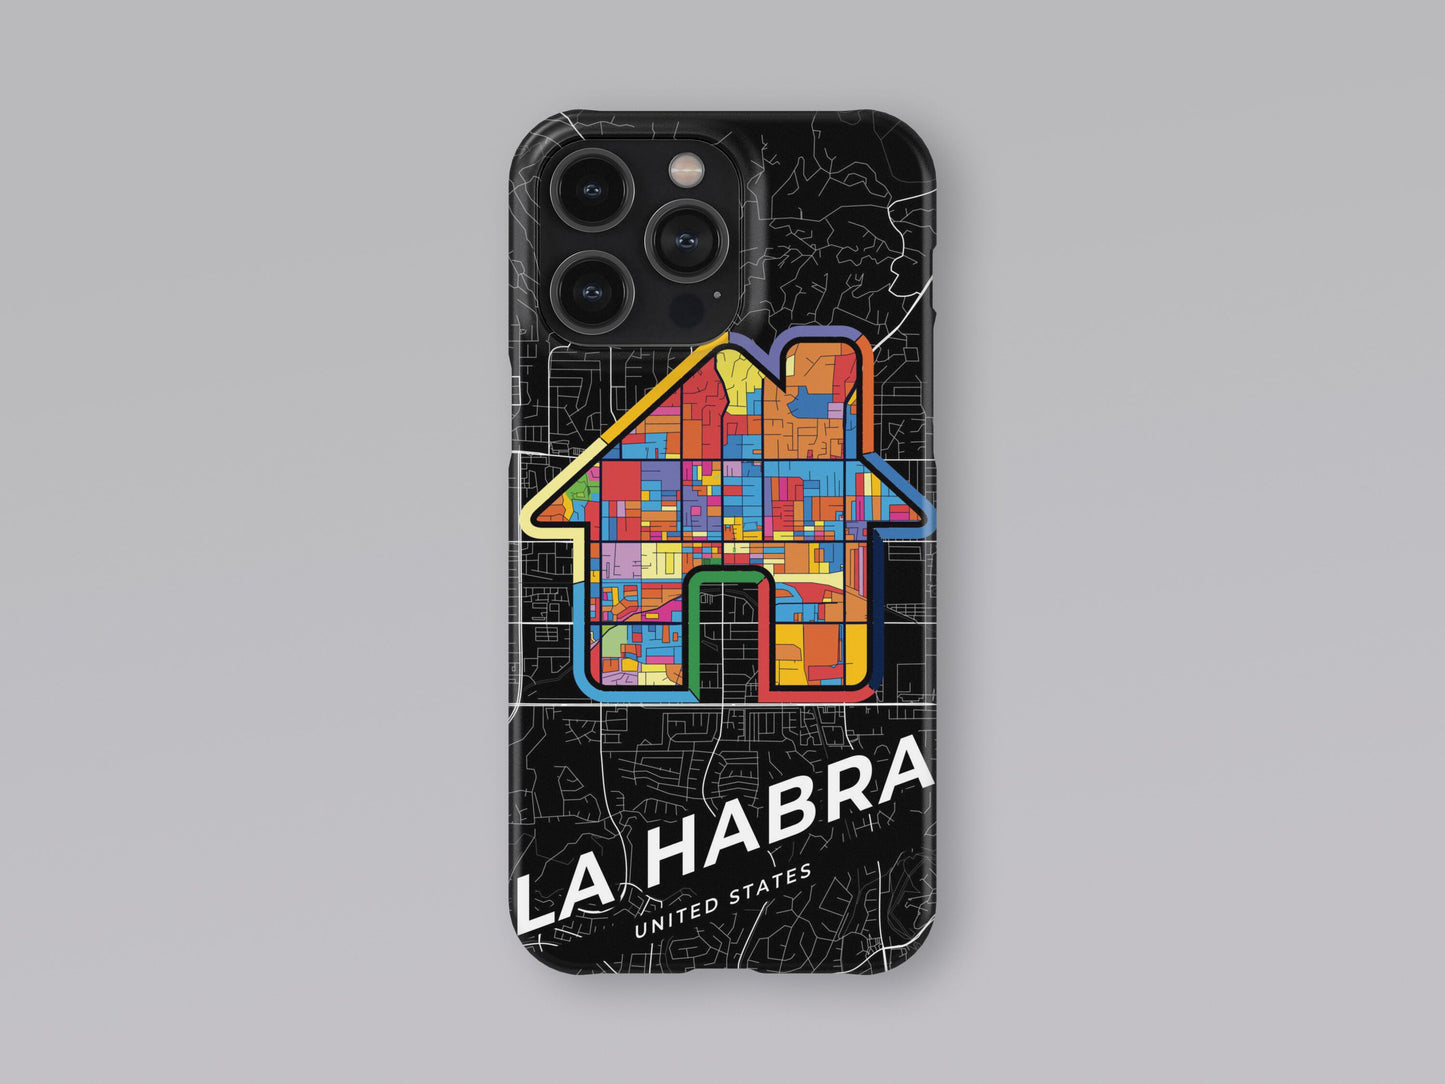 La Habra California slim phone case with colorful icon. Birthday, wedding or housewarming gift. Couple match cases. 3